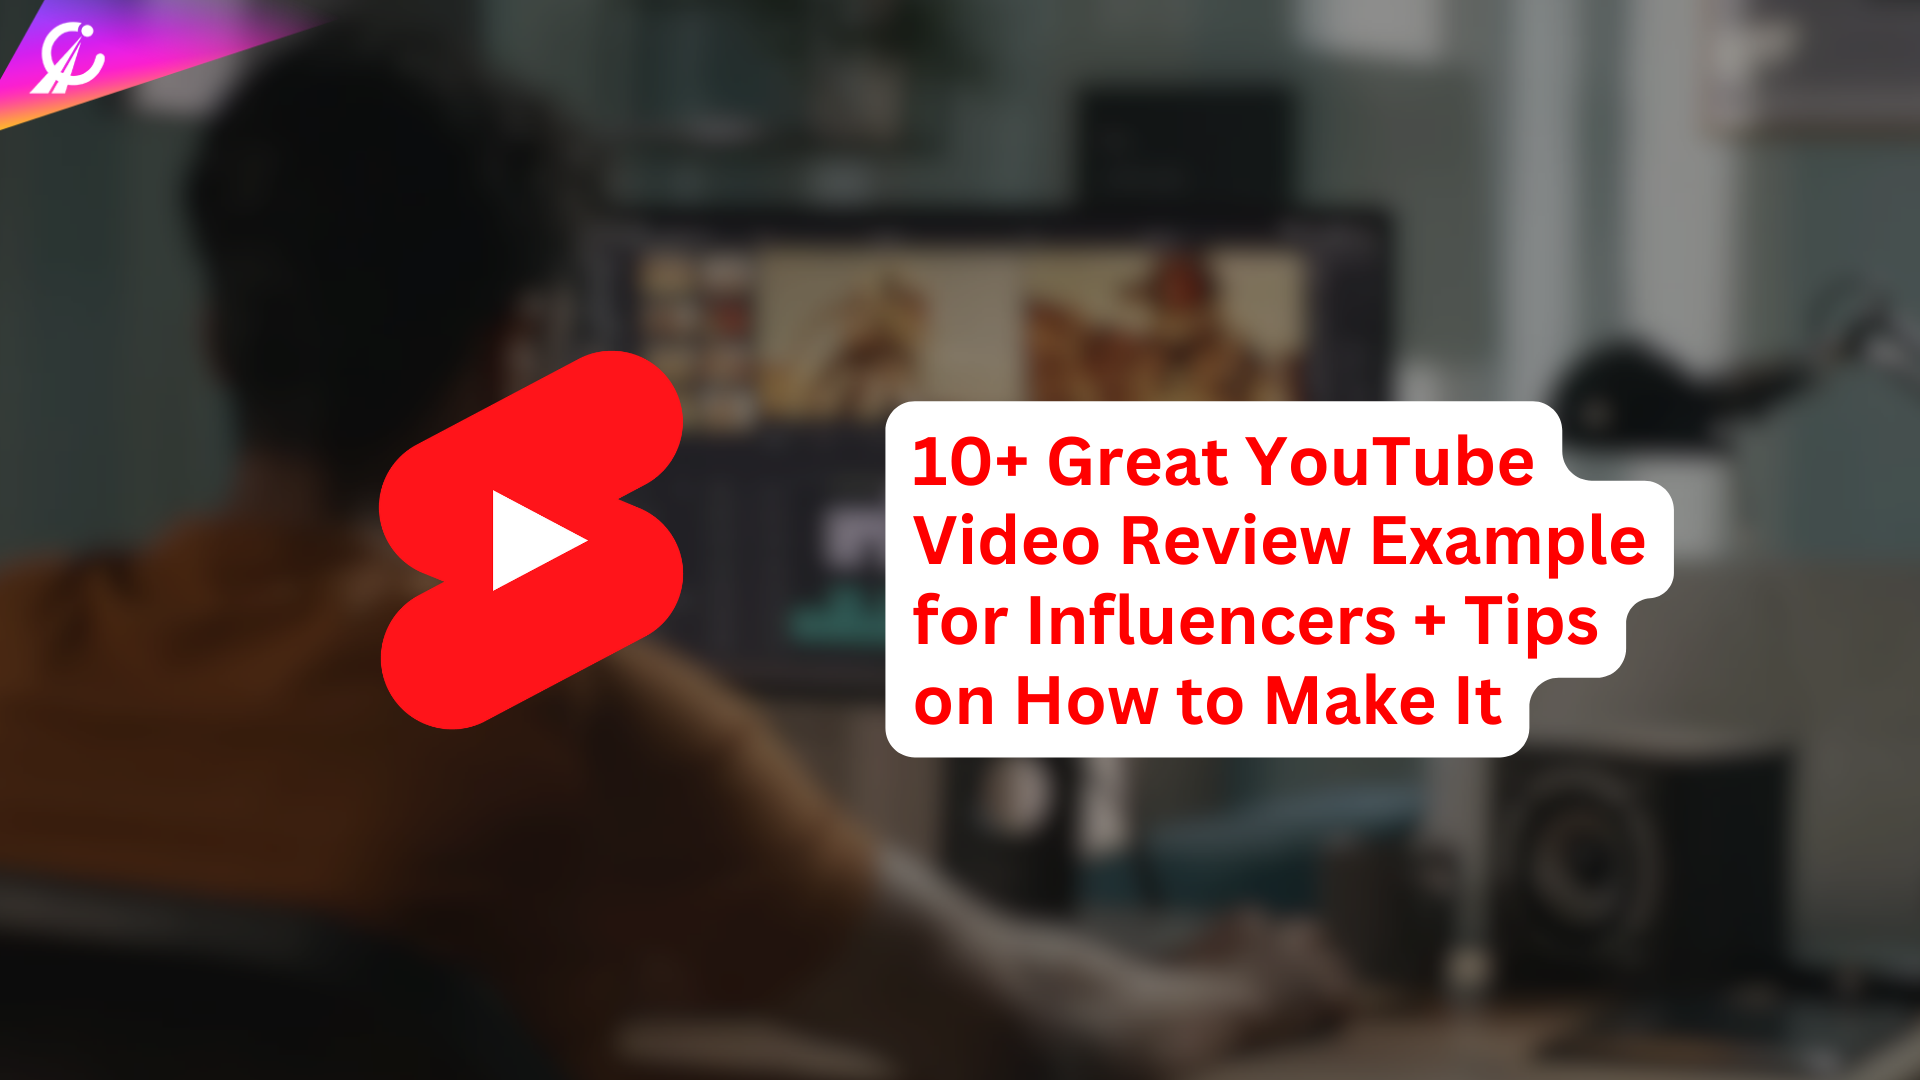 10+ Great YouTube Video Review Example for Influencers + Tips on How to Make It